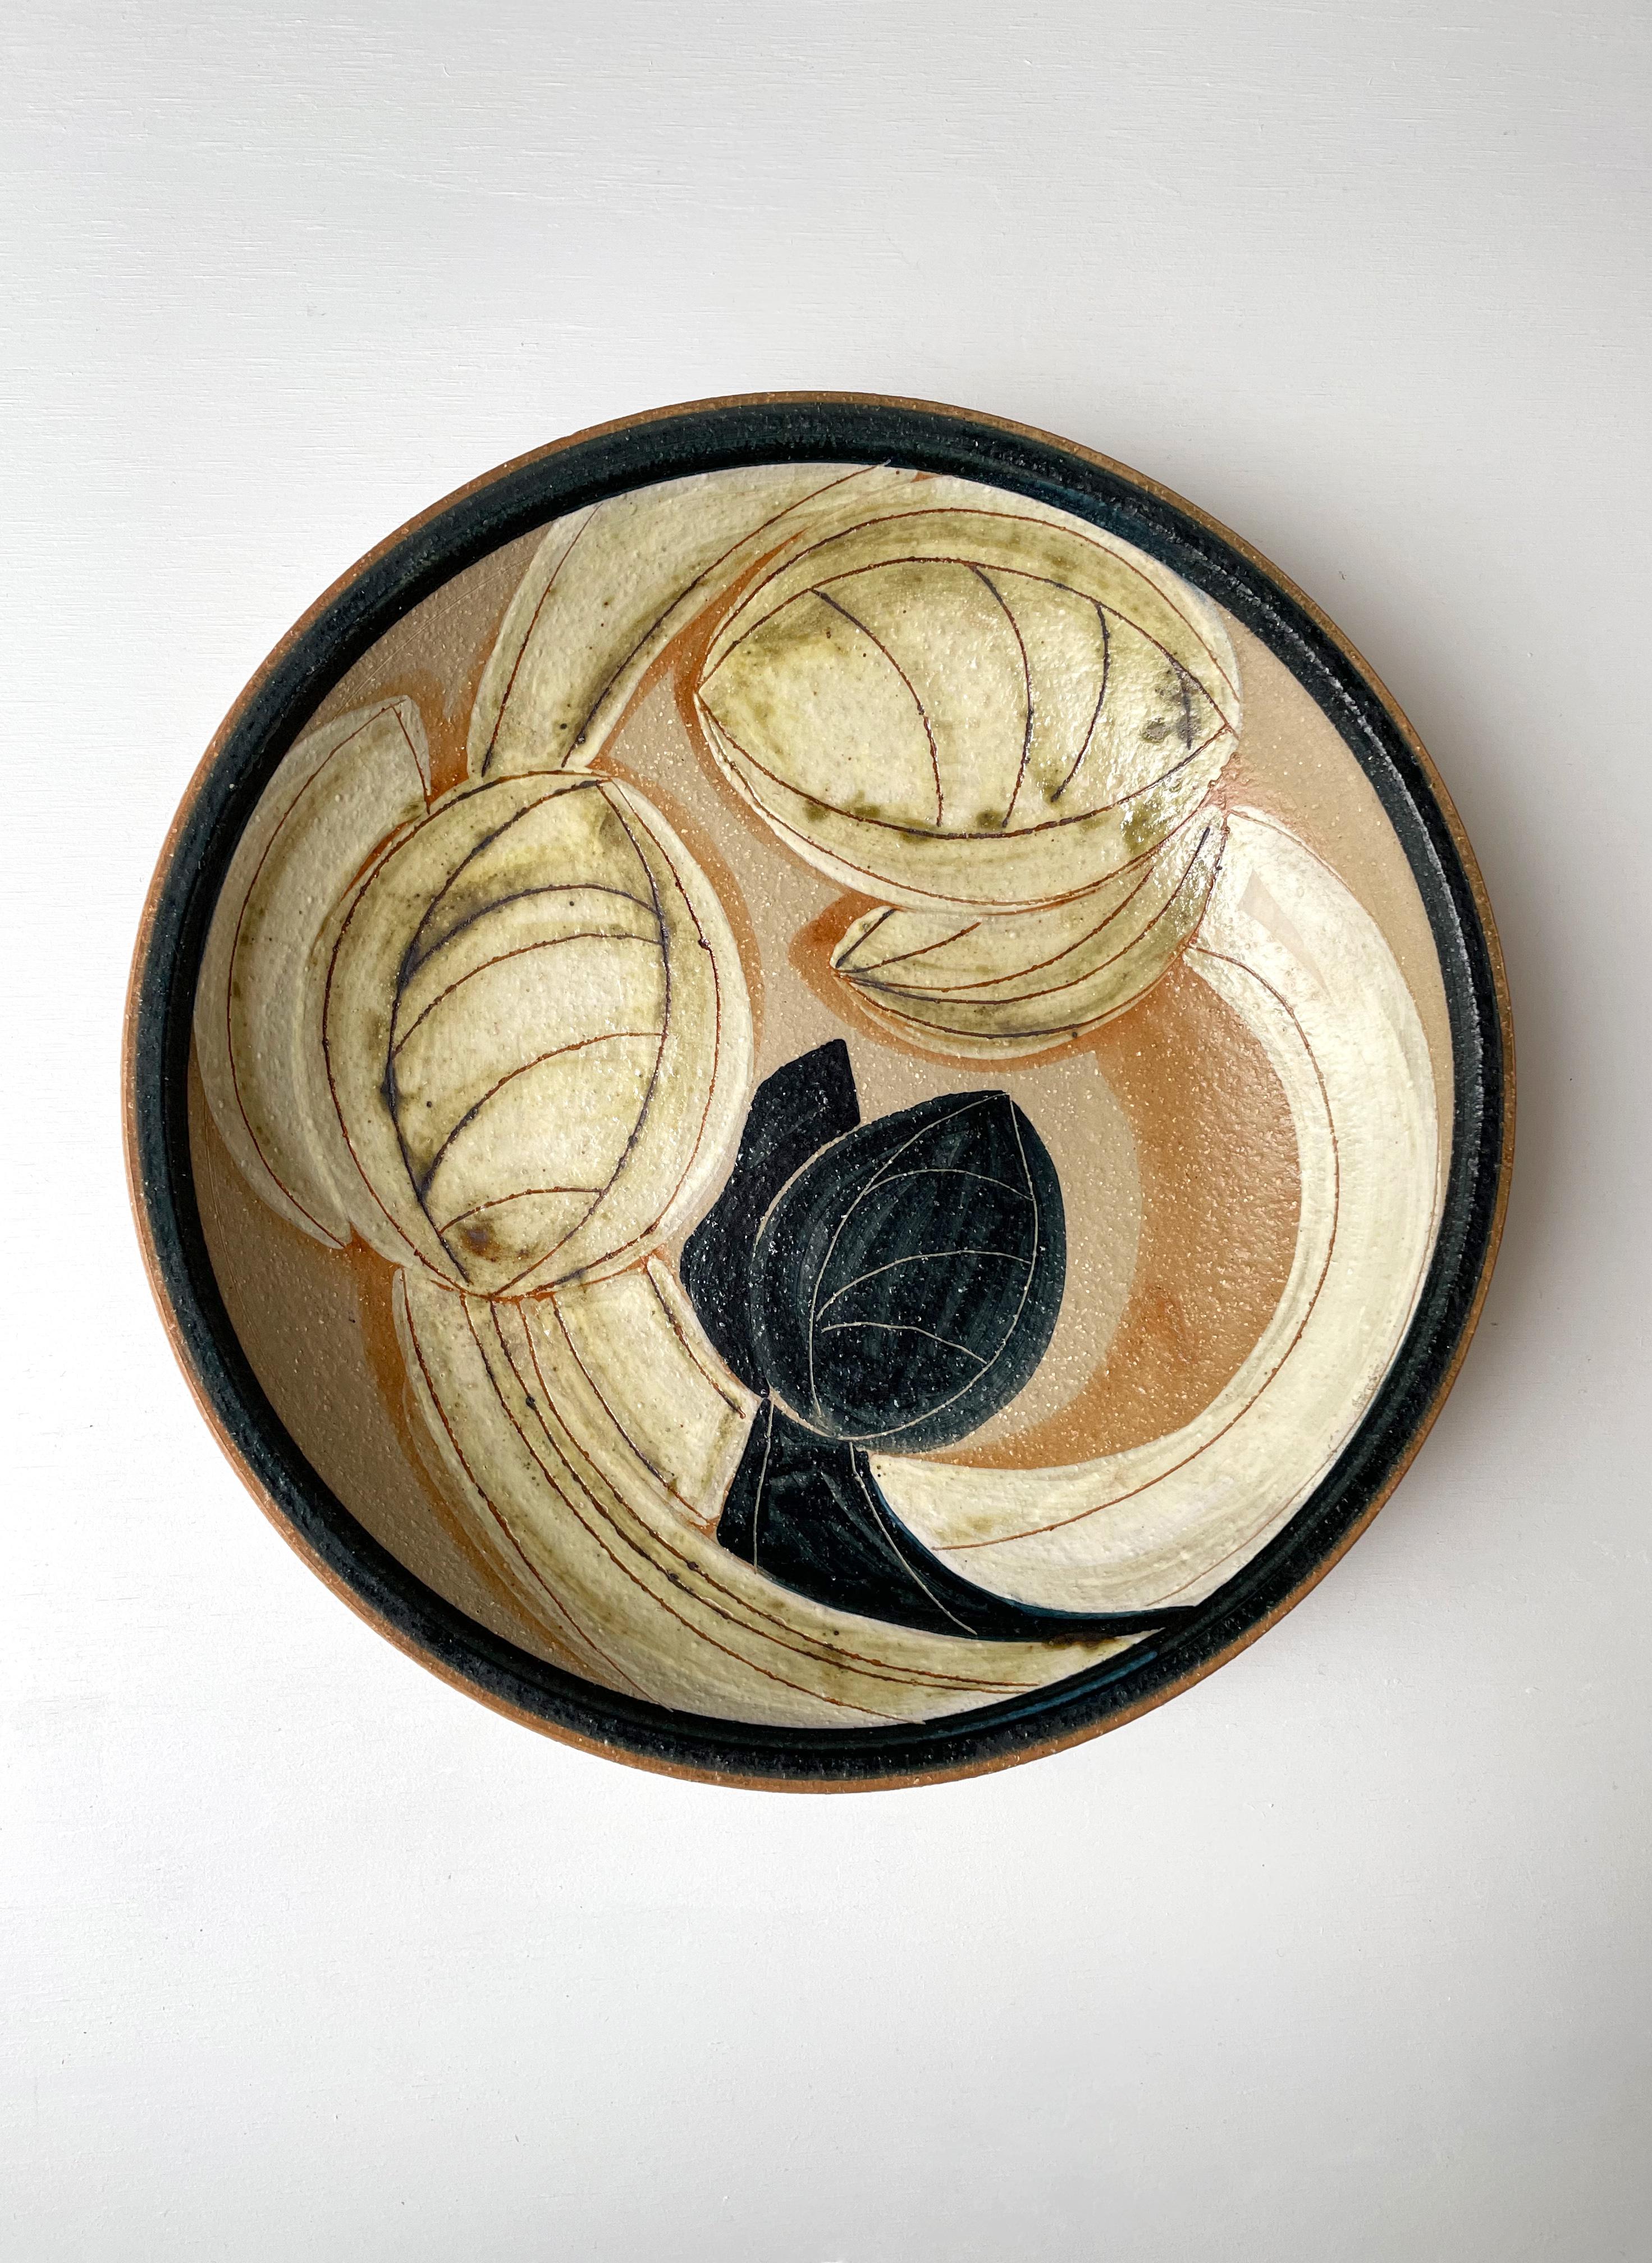 Graphically stunning large modernist handmade wall plate / bowl / centerpiece by ceramic artist Noomi Backhausen. Handpainted stylized organic floral decor in black, creamy yellow, warm orchre and clear glaze with carved lines. Raw stoneware on the